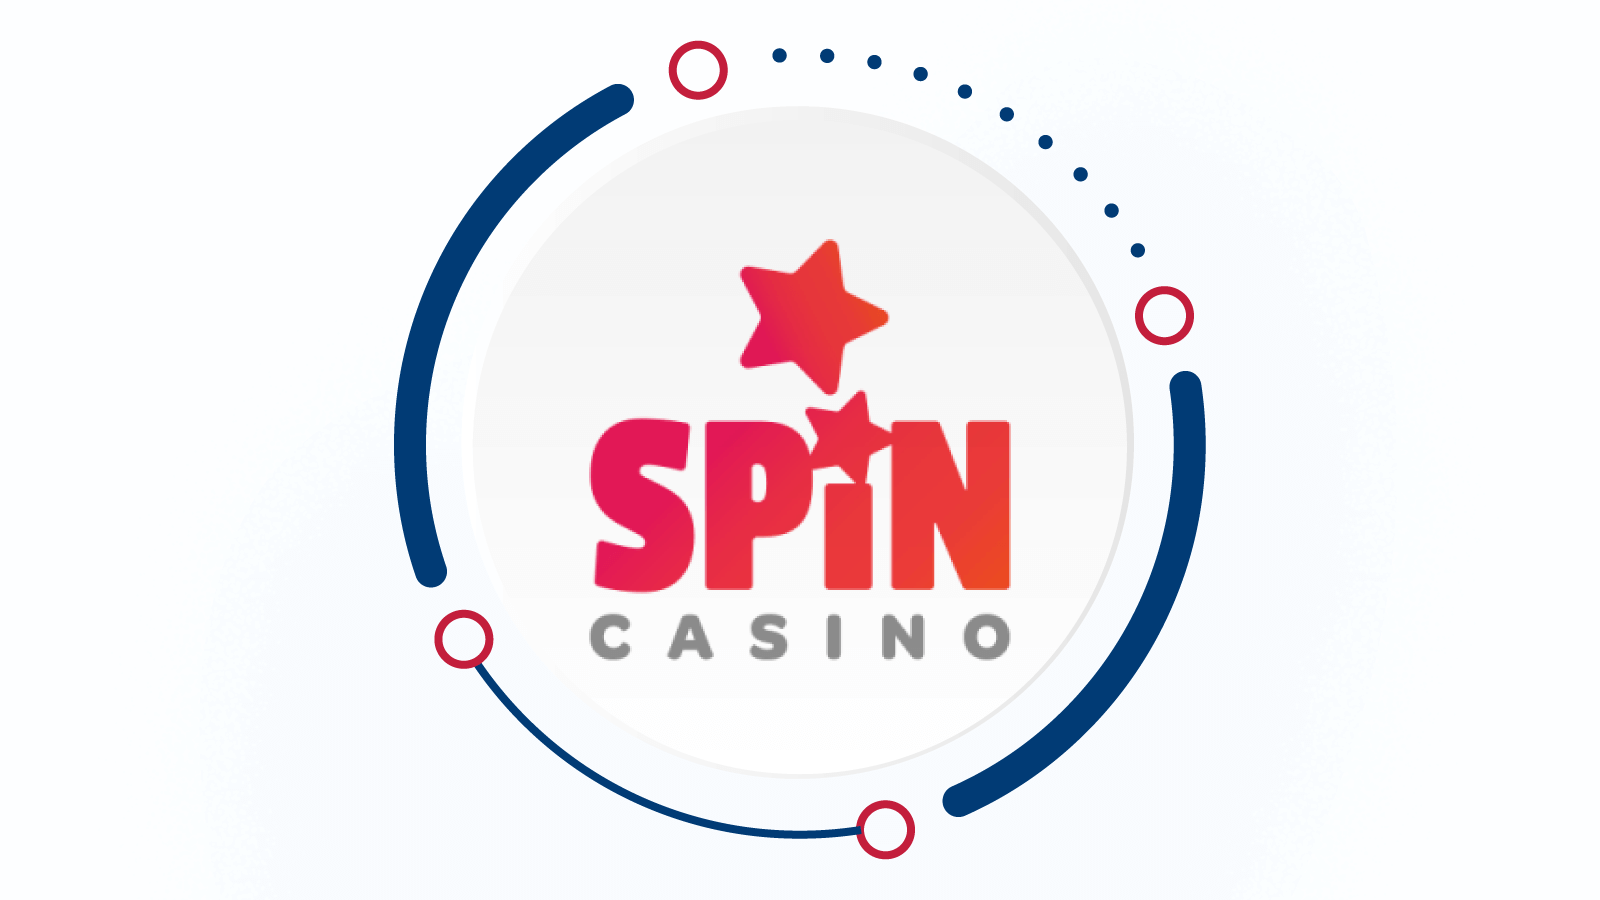 Information page about online casino: a useful note